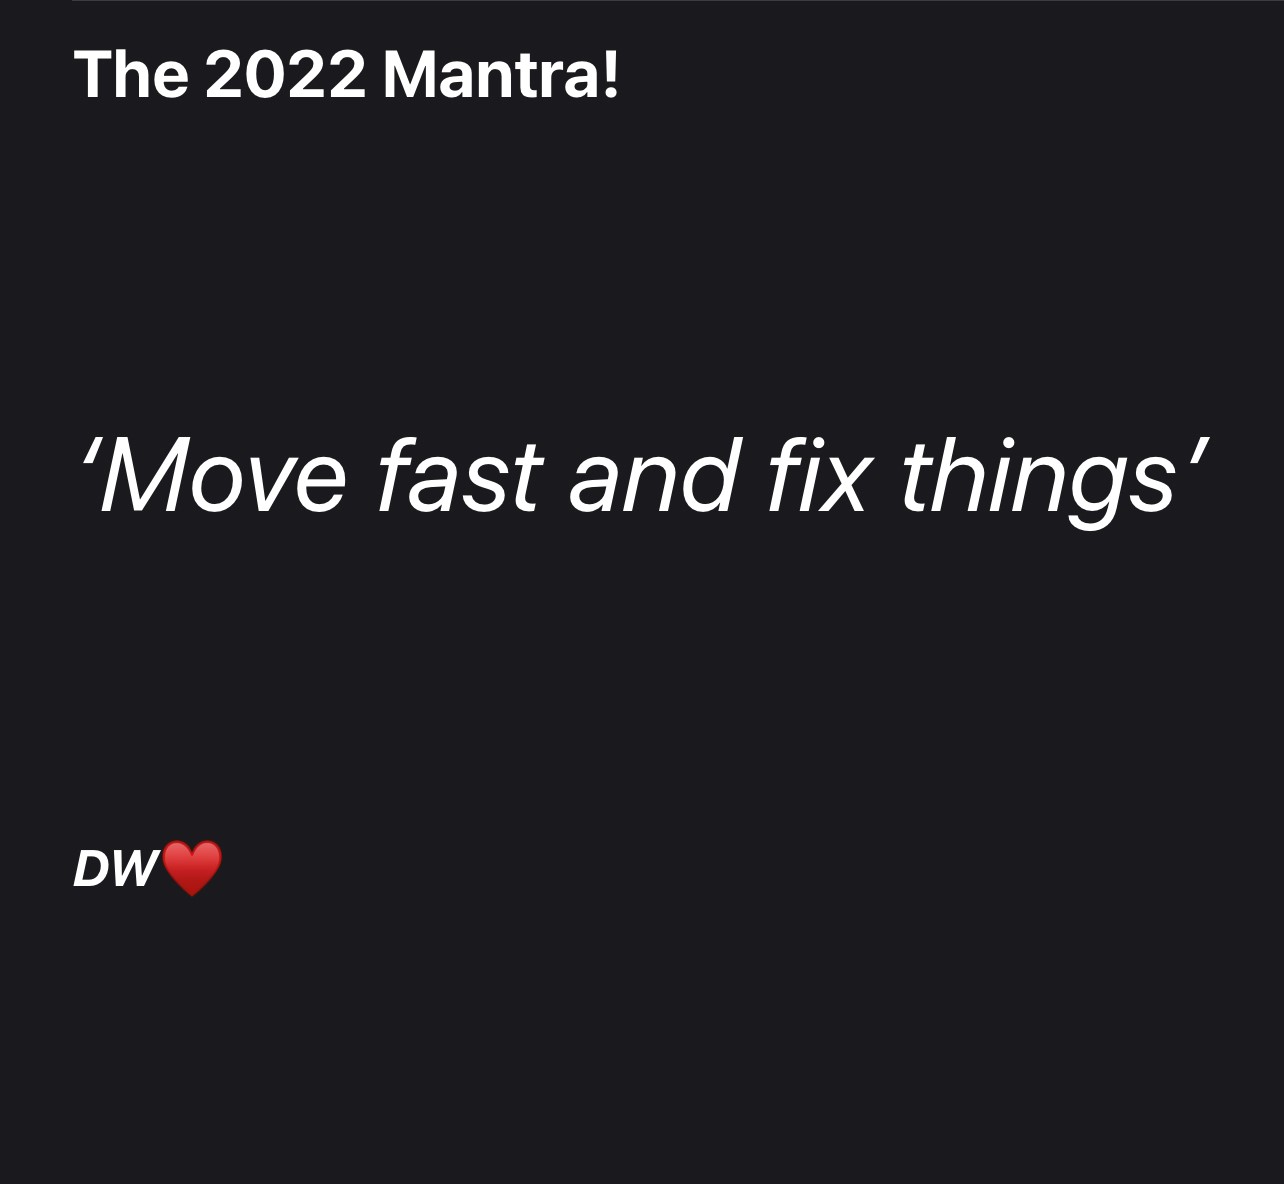 Move Fast & Fix Things